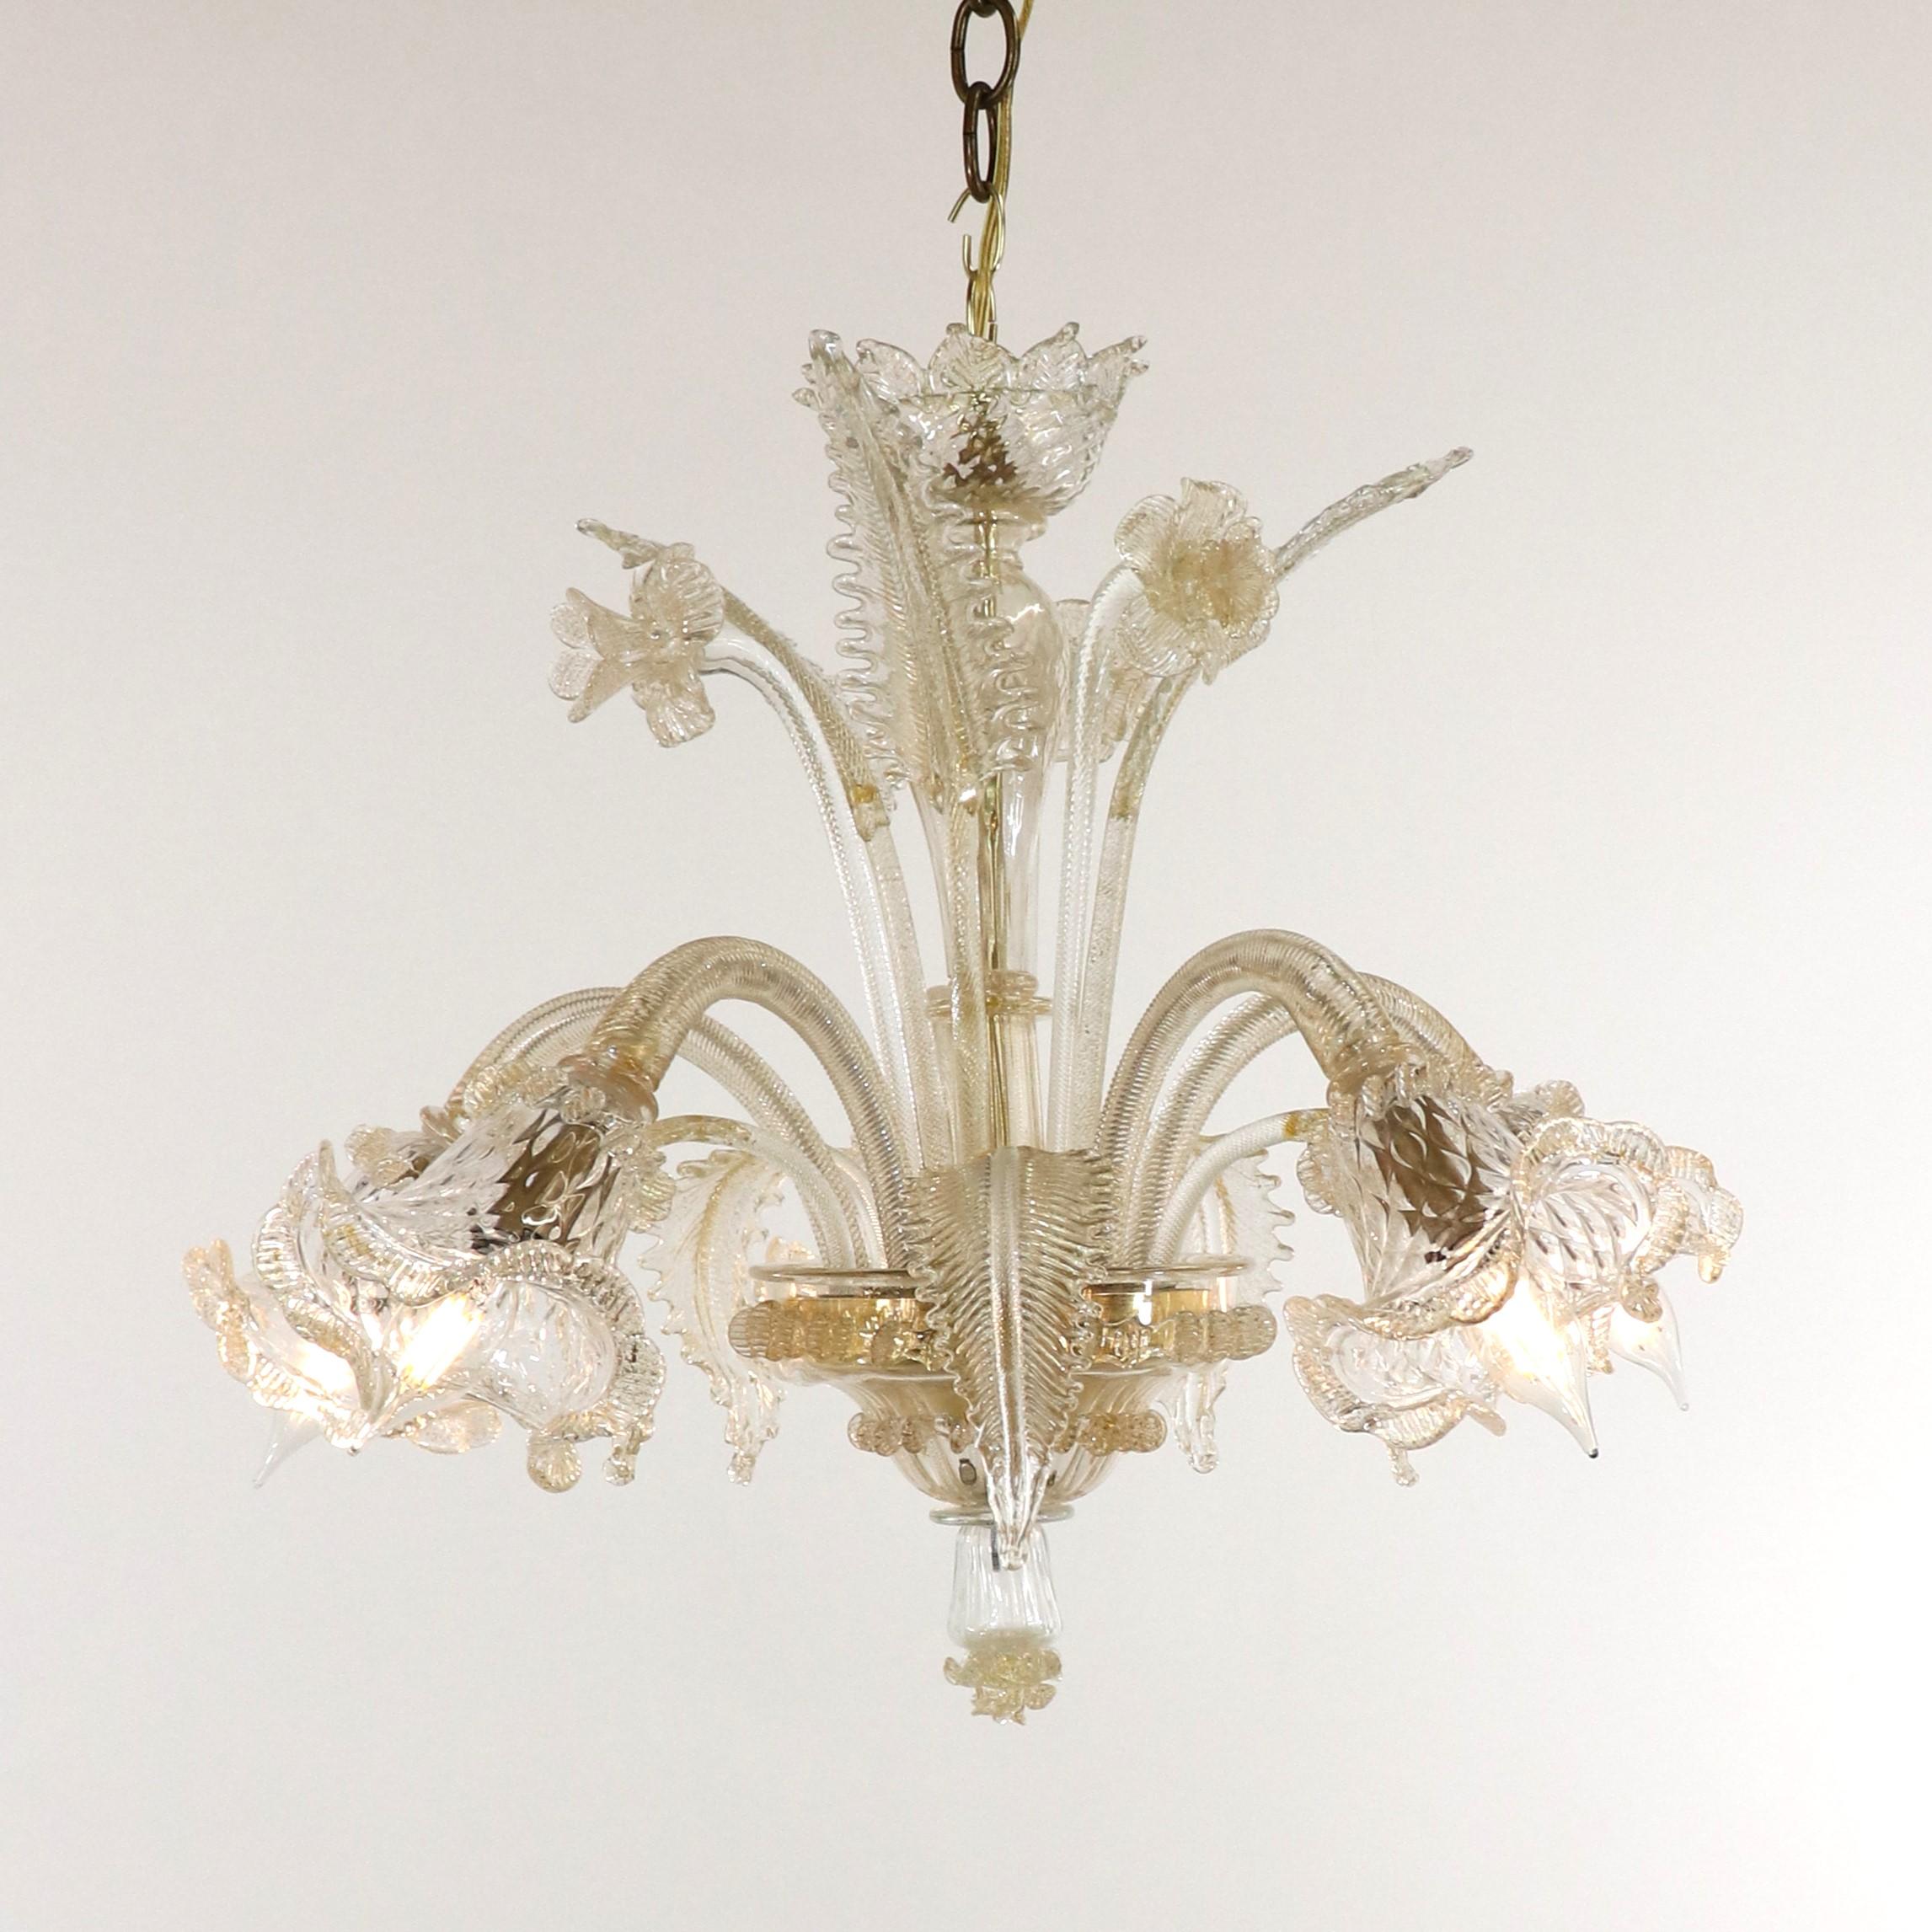 This handcrafted gold-infused cristallo Murano chandelier has five scroll arms with tri-lobed cups, utilizing a rigaree trim. Featuring a bulbous center column with blooming details, stylized here with daffodils and leaves. The glass houses on the